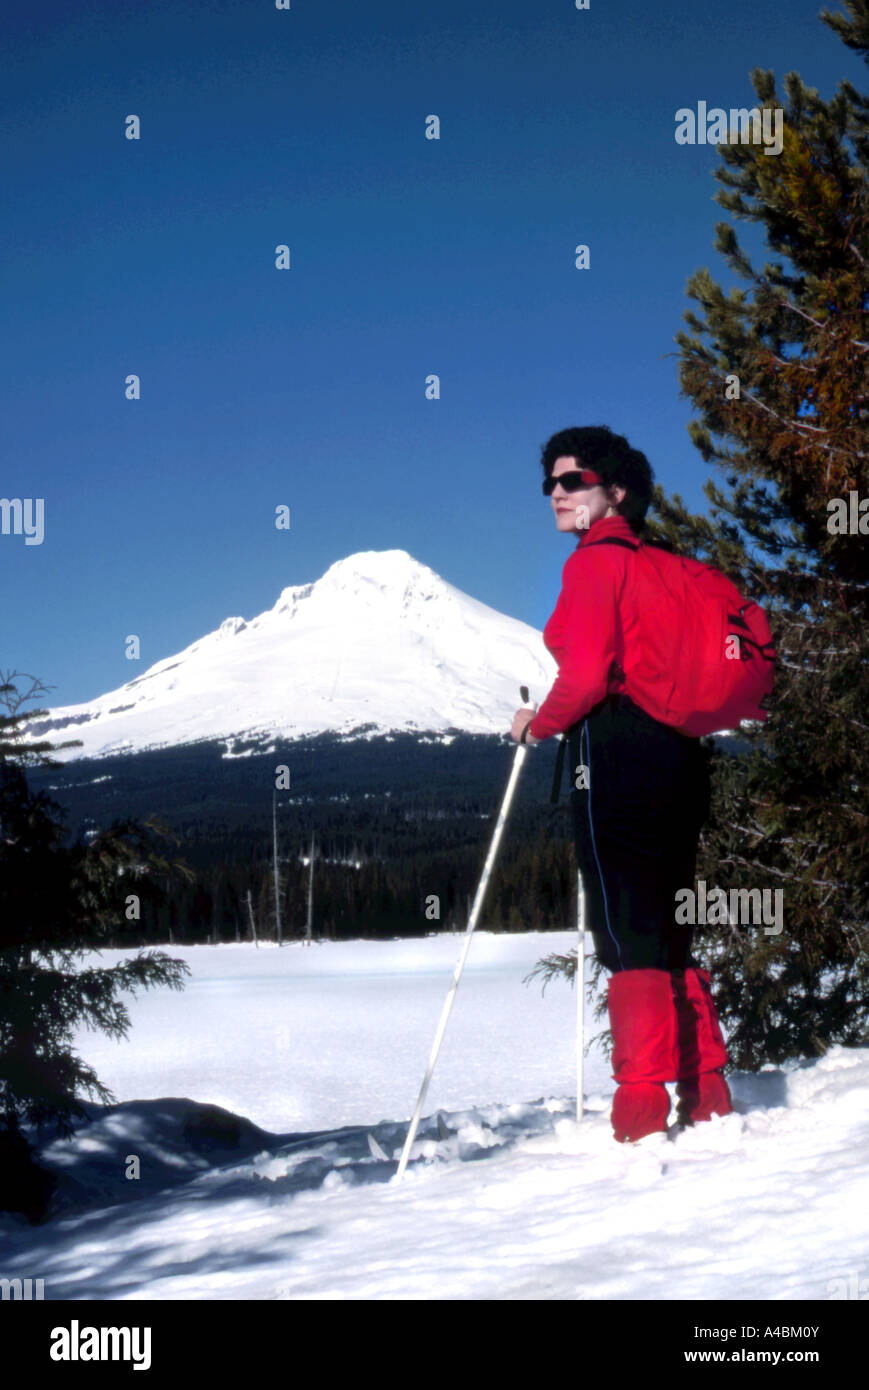 32,928.09200 Cross-country skier woman in red, Mt Hood ski area clear blue sky fresh powder snow snowcapped mountain, magazine copy space, Oregon USA Stock Photo